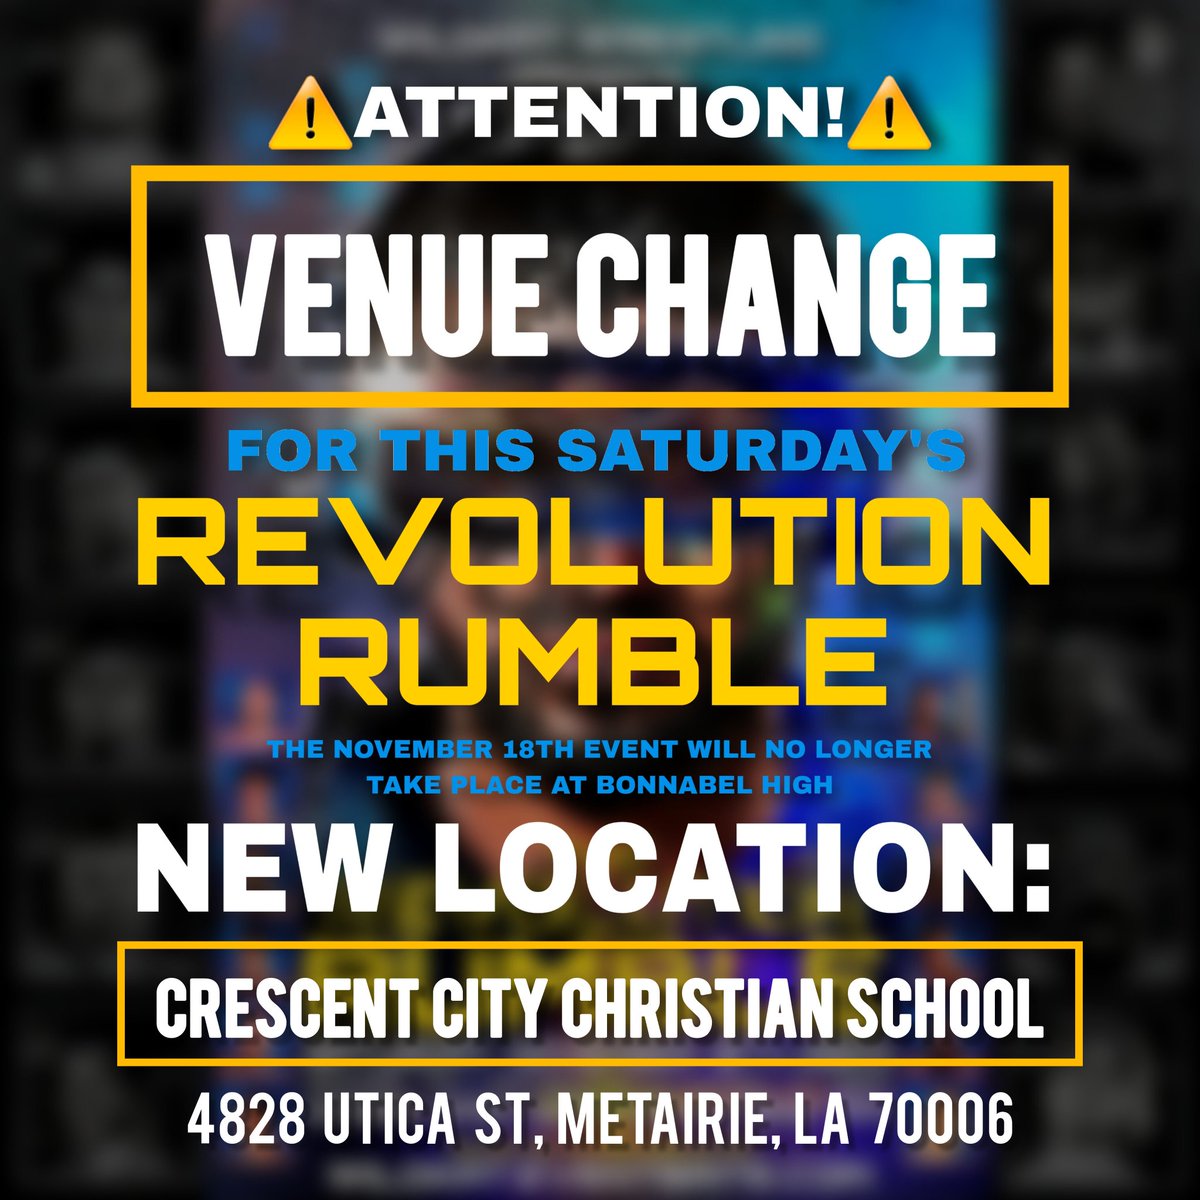 ⚠️VENUE CHANGE!⚠️ ‼️ATTENTION: The @WildKatSports REVOLUTION RUMBLE will NOW take place from Crescent City Christian School in Metairie, Louisiana this Saturday! Tickets still available at wildkat.eventbrite.com